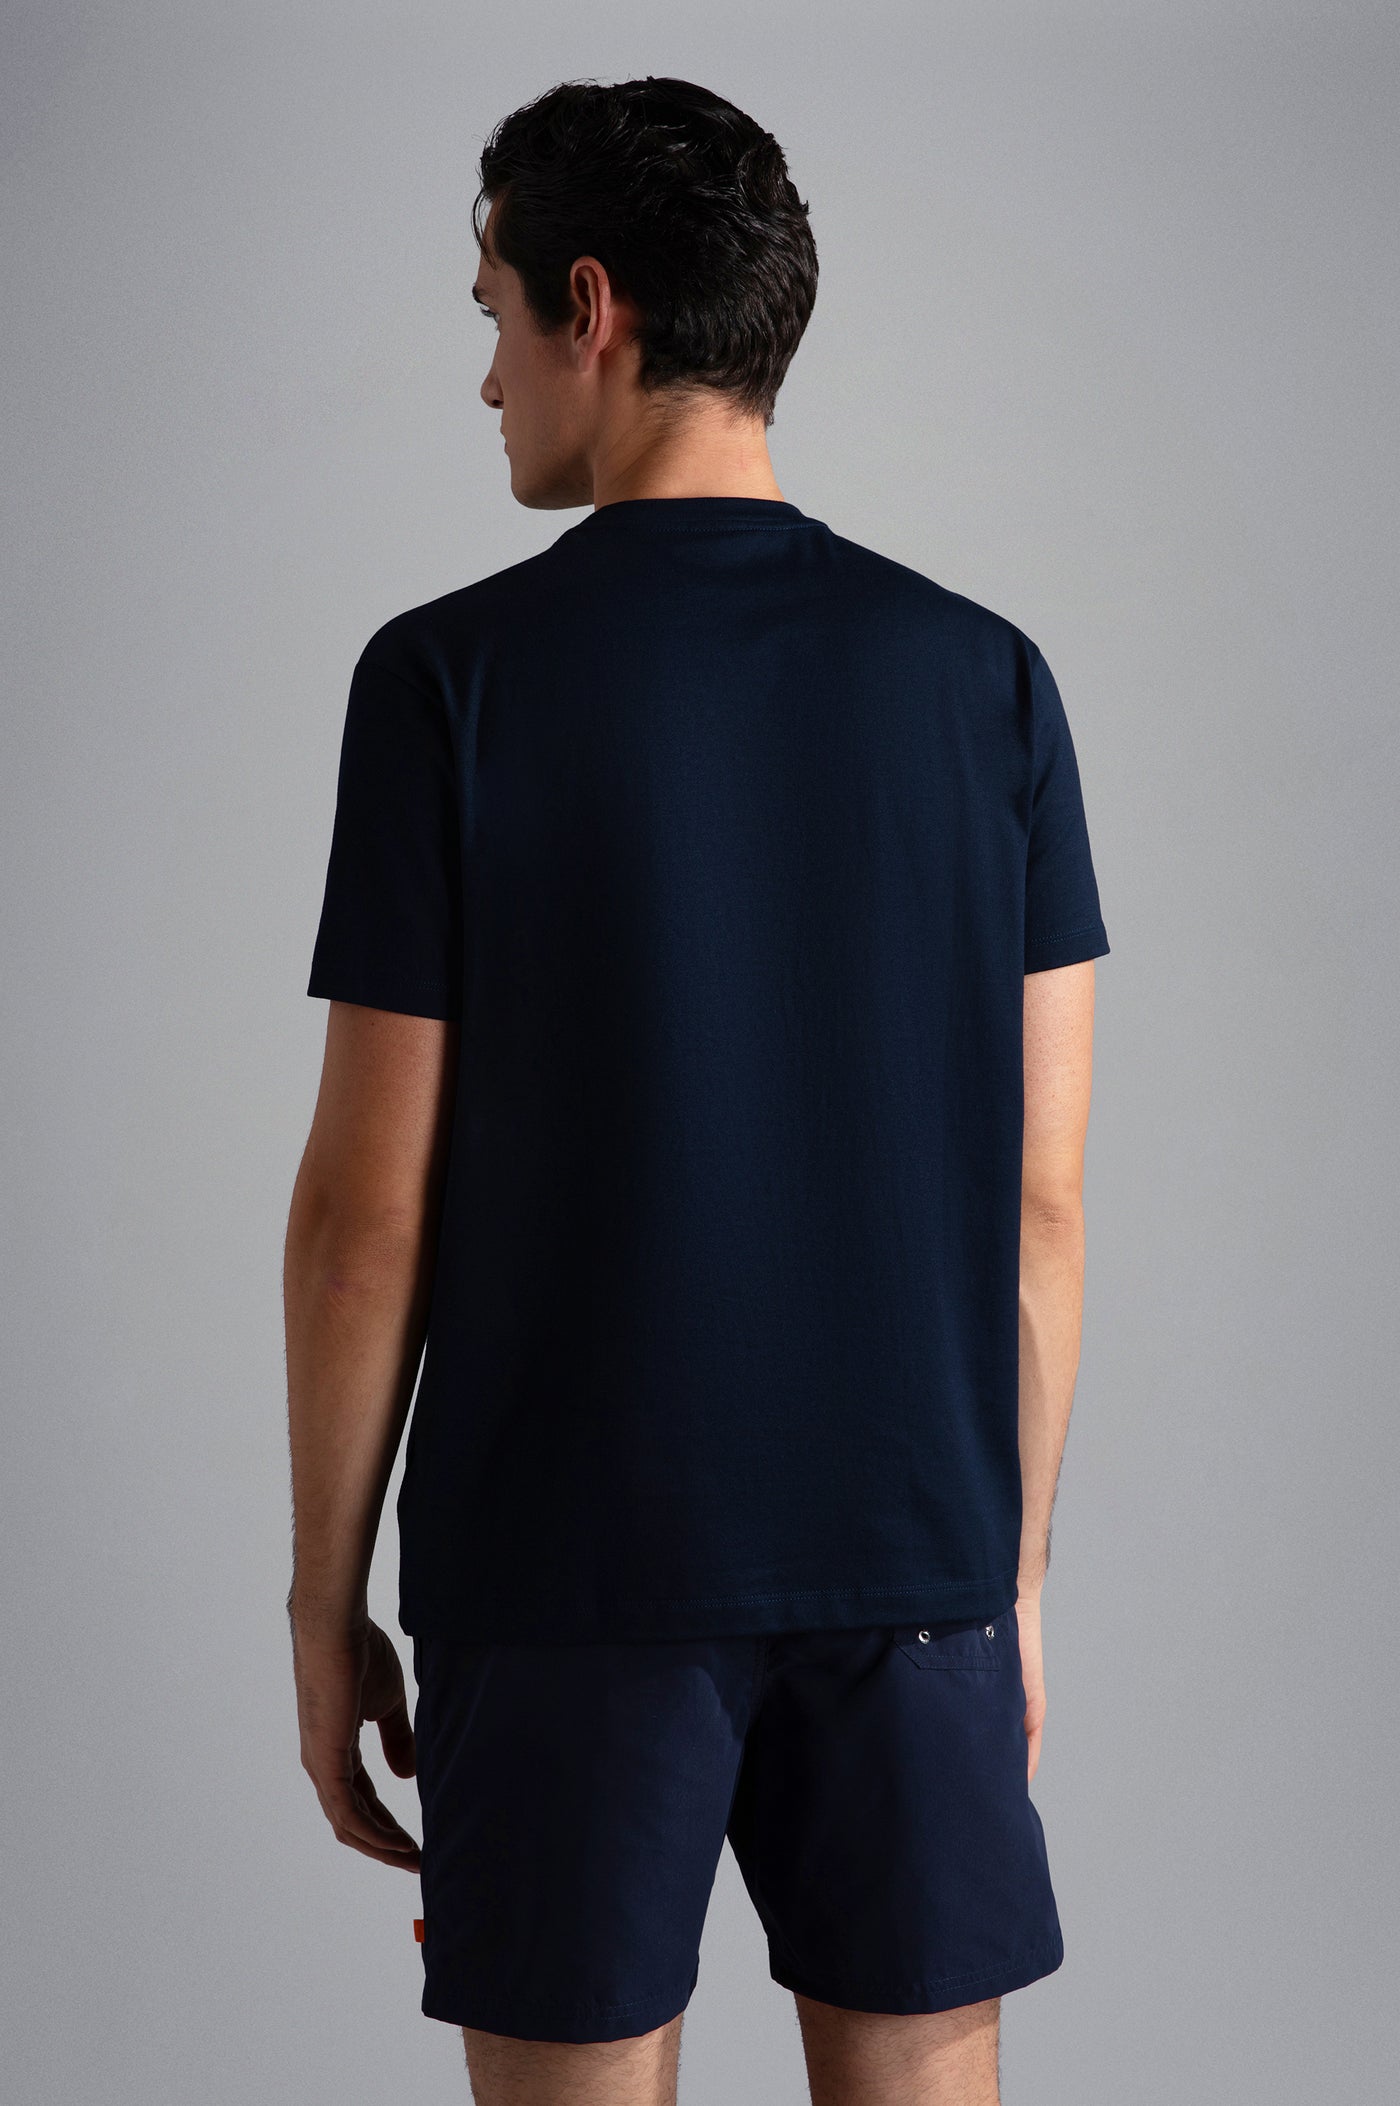 Paul & Shark Cotton Jersey T-shirt with Multicolor Embroidered Fin | Navy